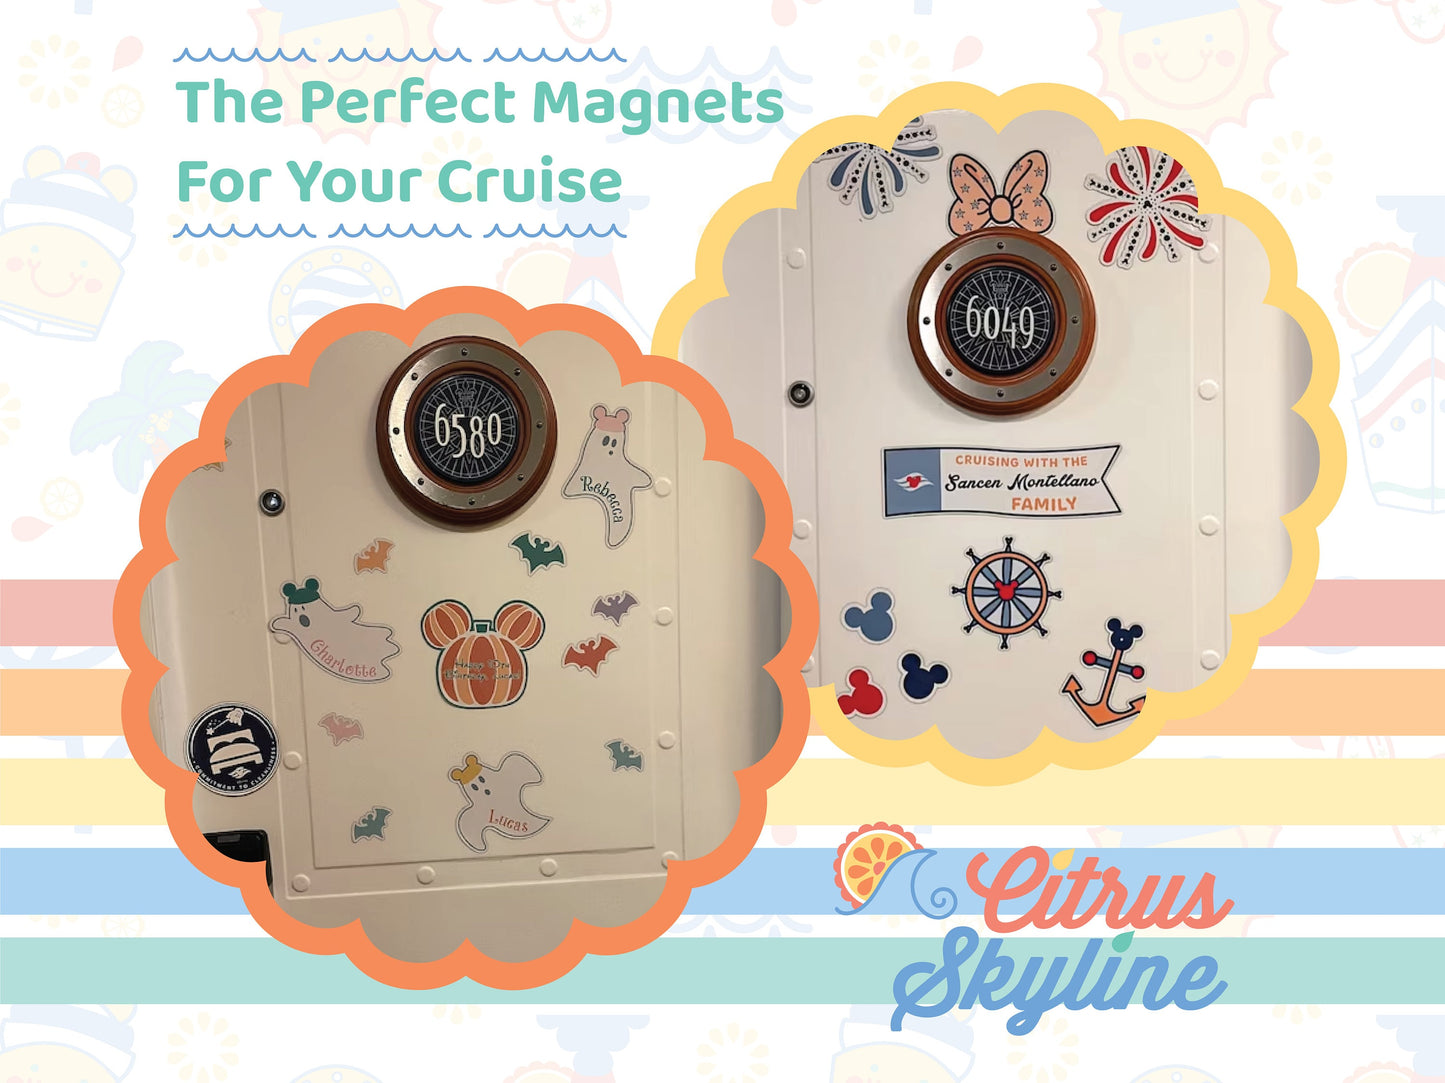 New Year Cruise Magnets in Pretty Pastels